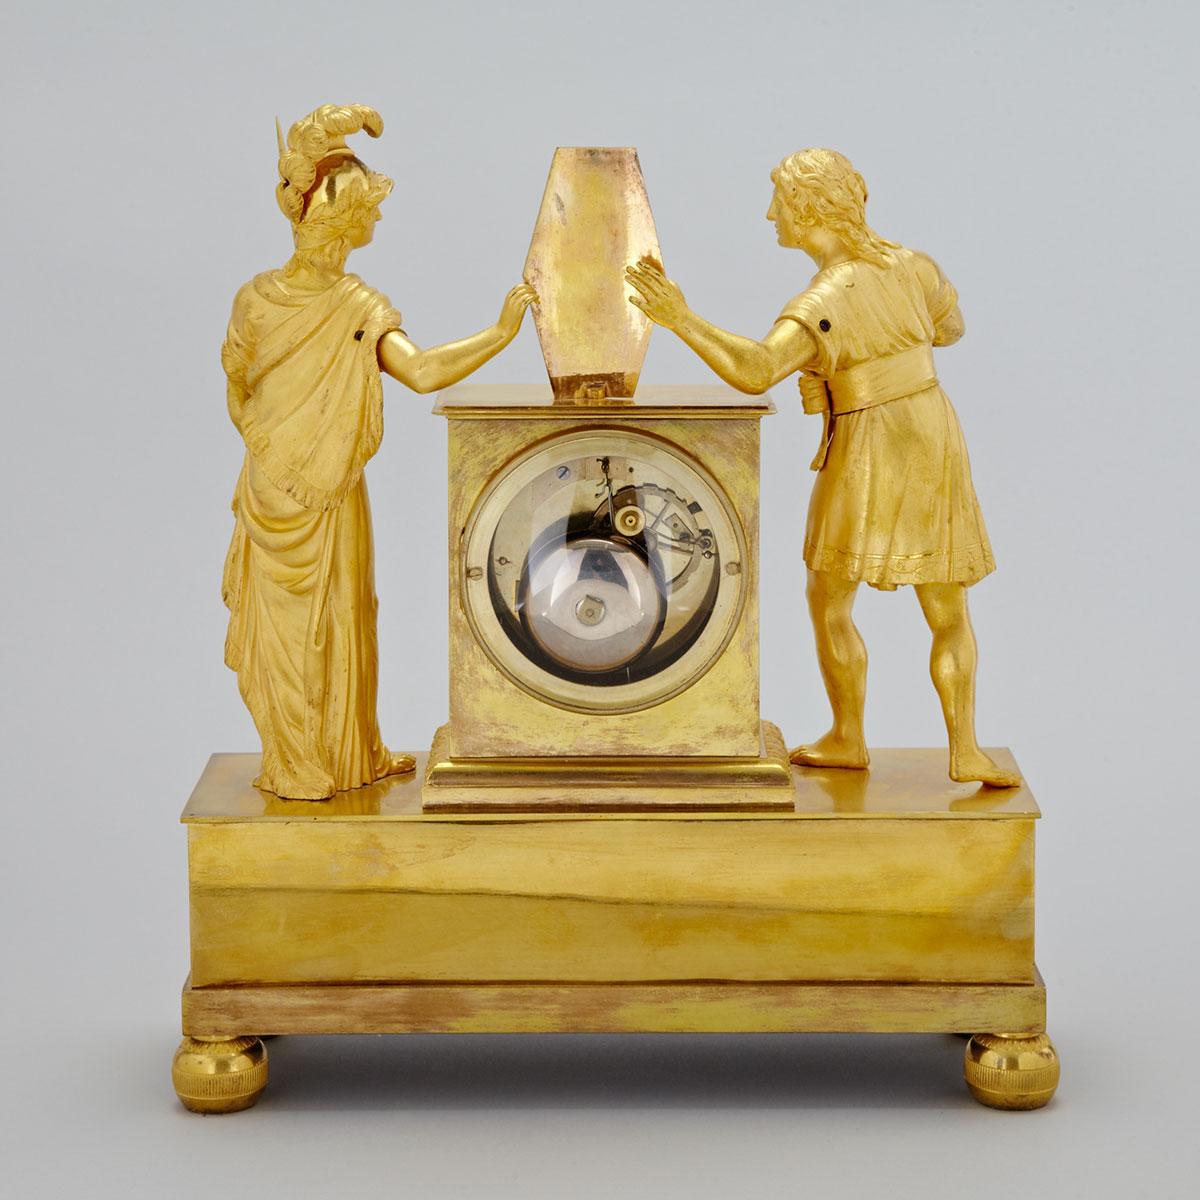 French Empire Gilt Bronze Figural Mantle Clock, Paris, early 19th century